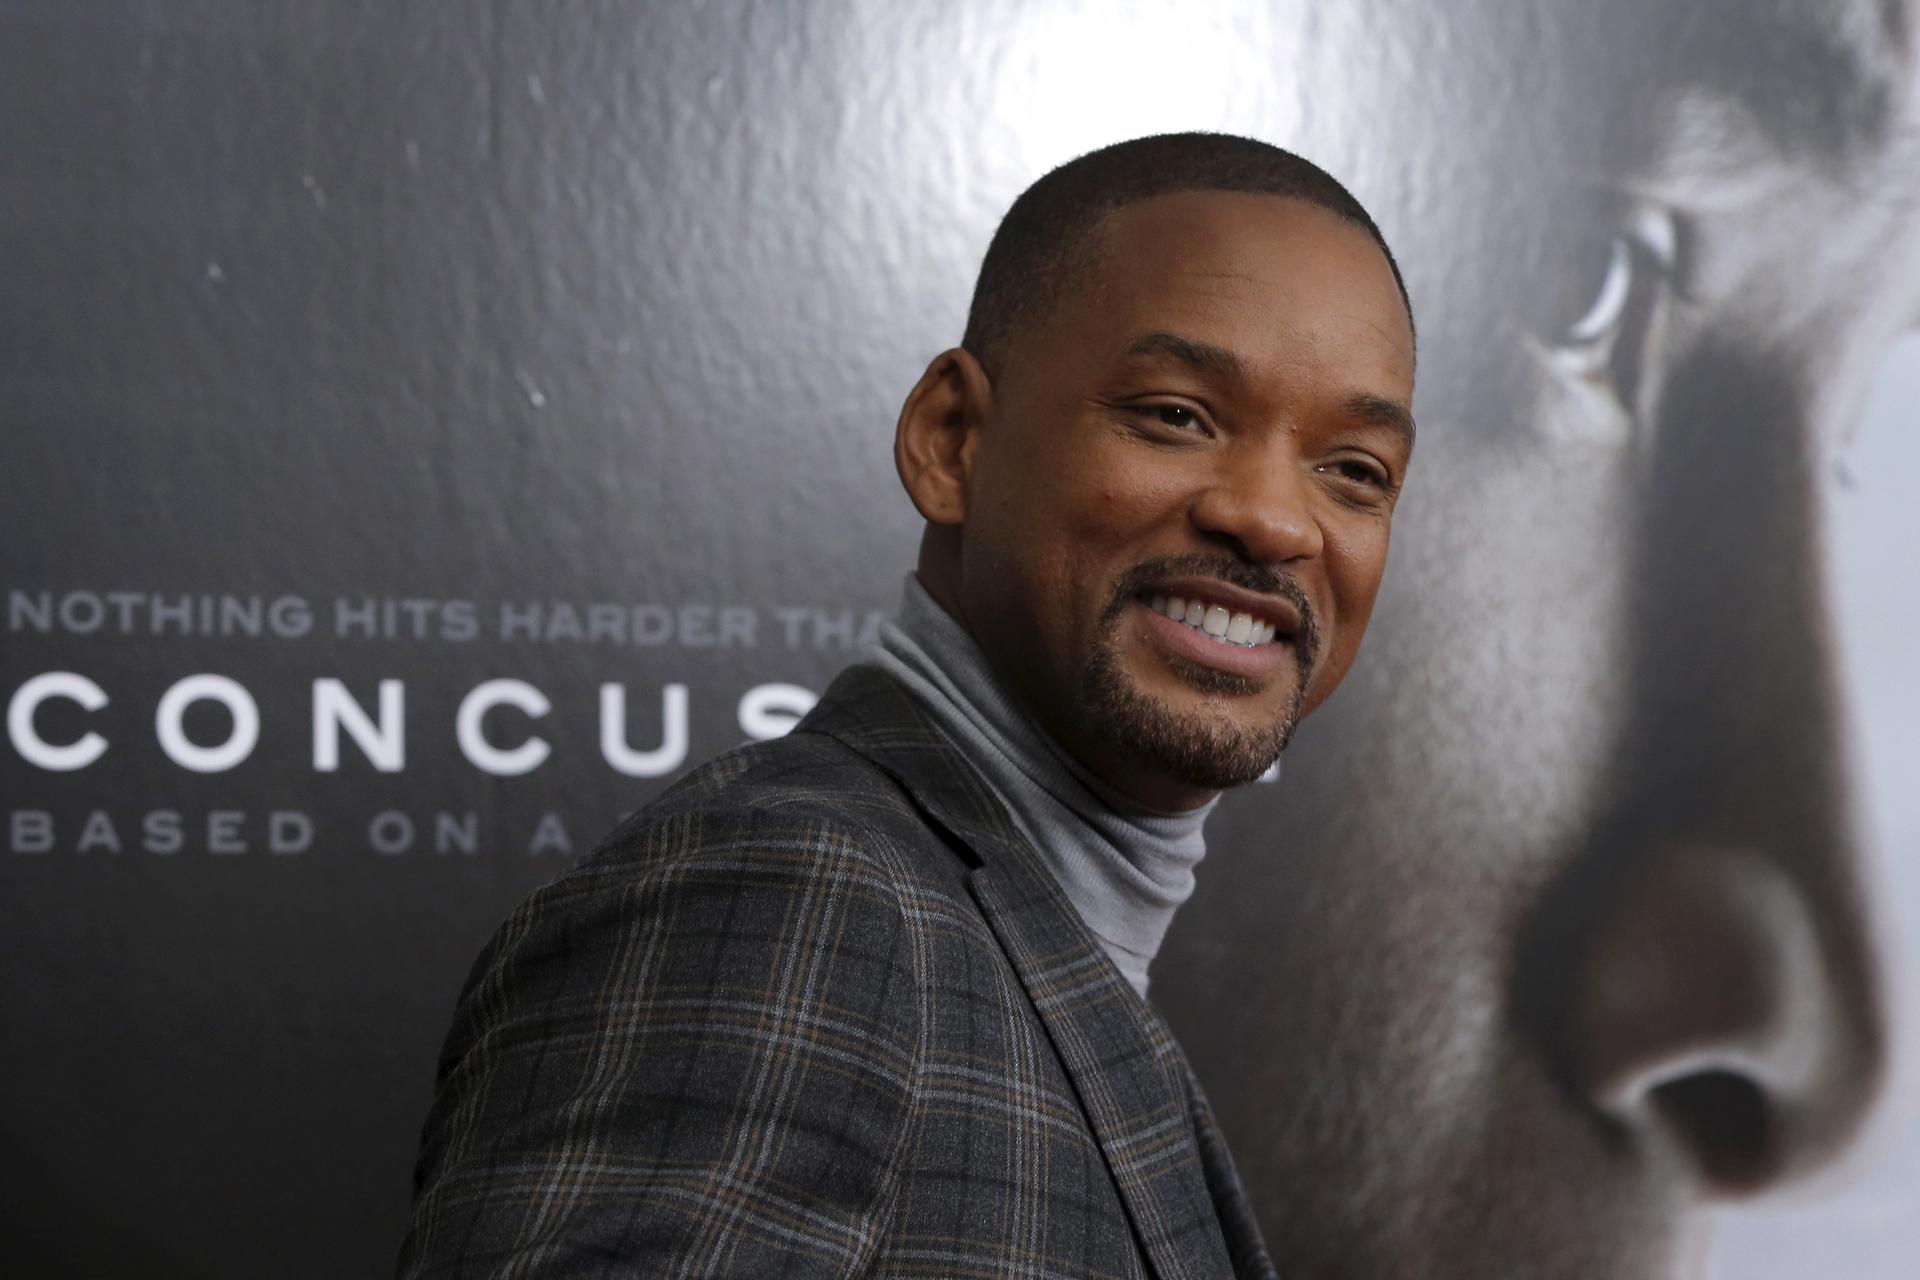 Actor Will Smith poses as he arrives for the New York premiere of the film "Concussion" in the Manhattan borough of New York City, December 16, 2015. "Concussion", which stars Smith portraying Dr. Bennet Omalu, the pathologist who a decade ago first linke